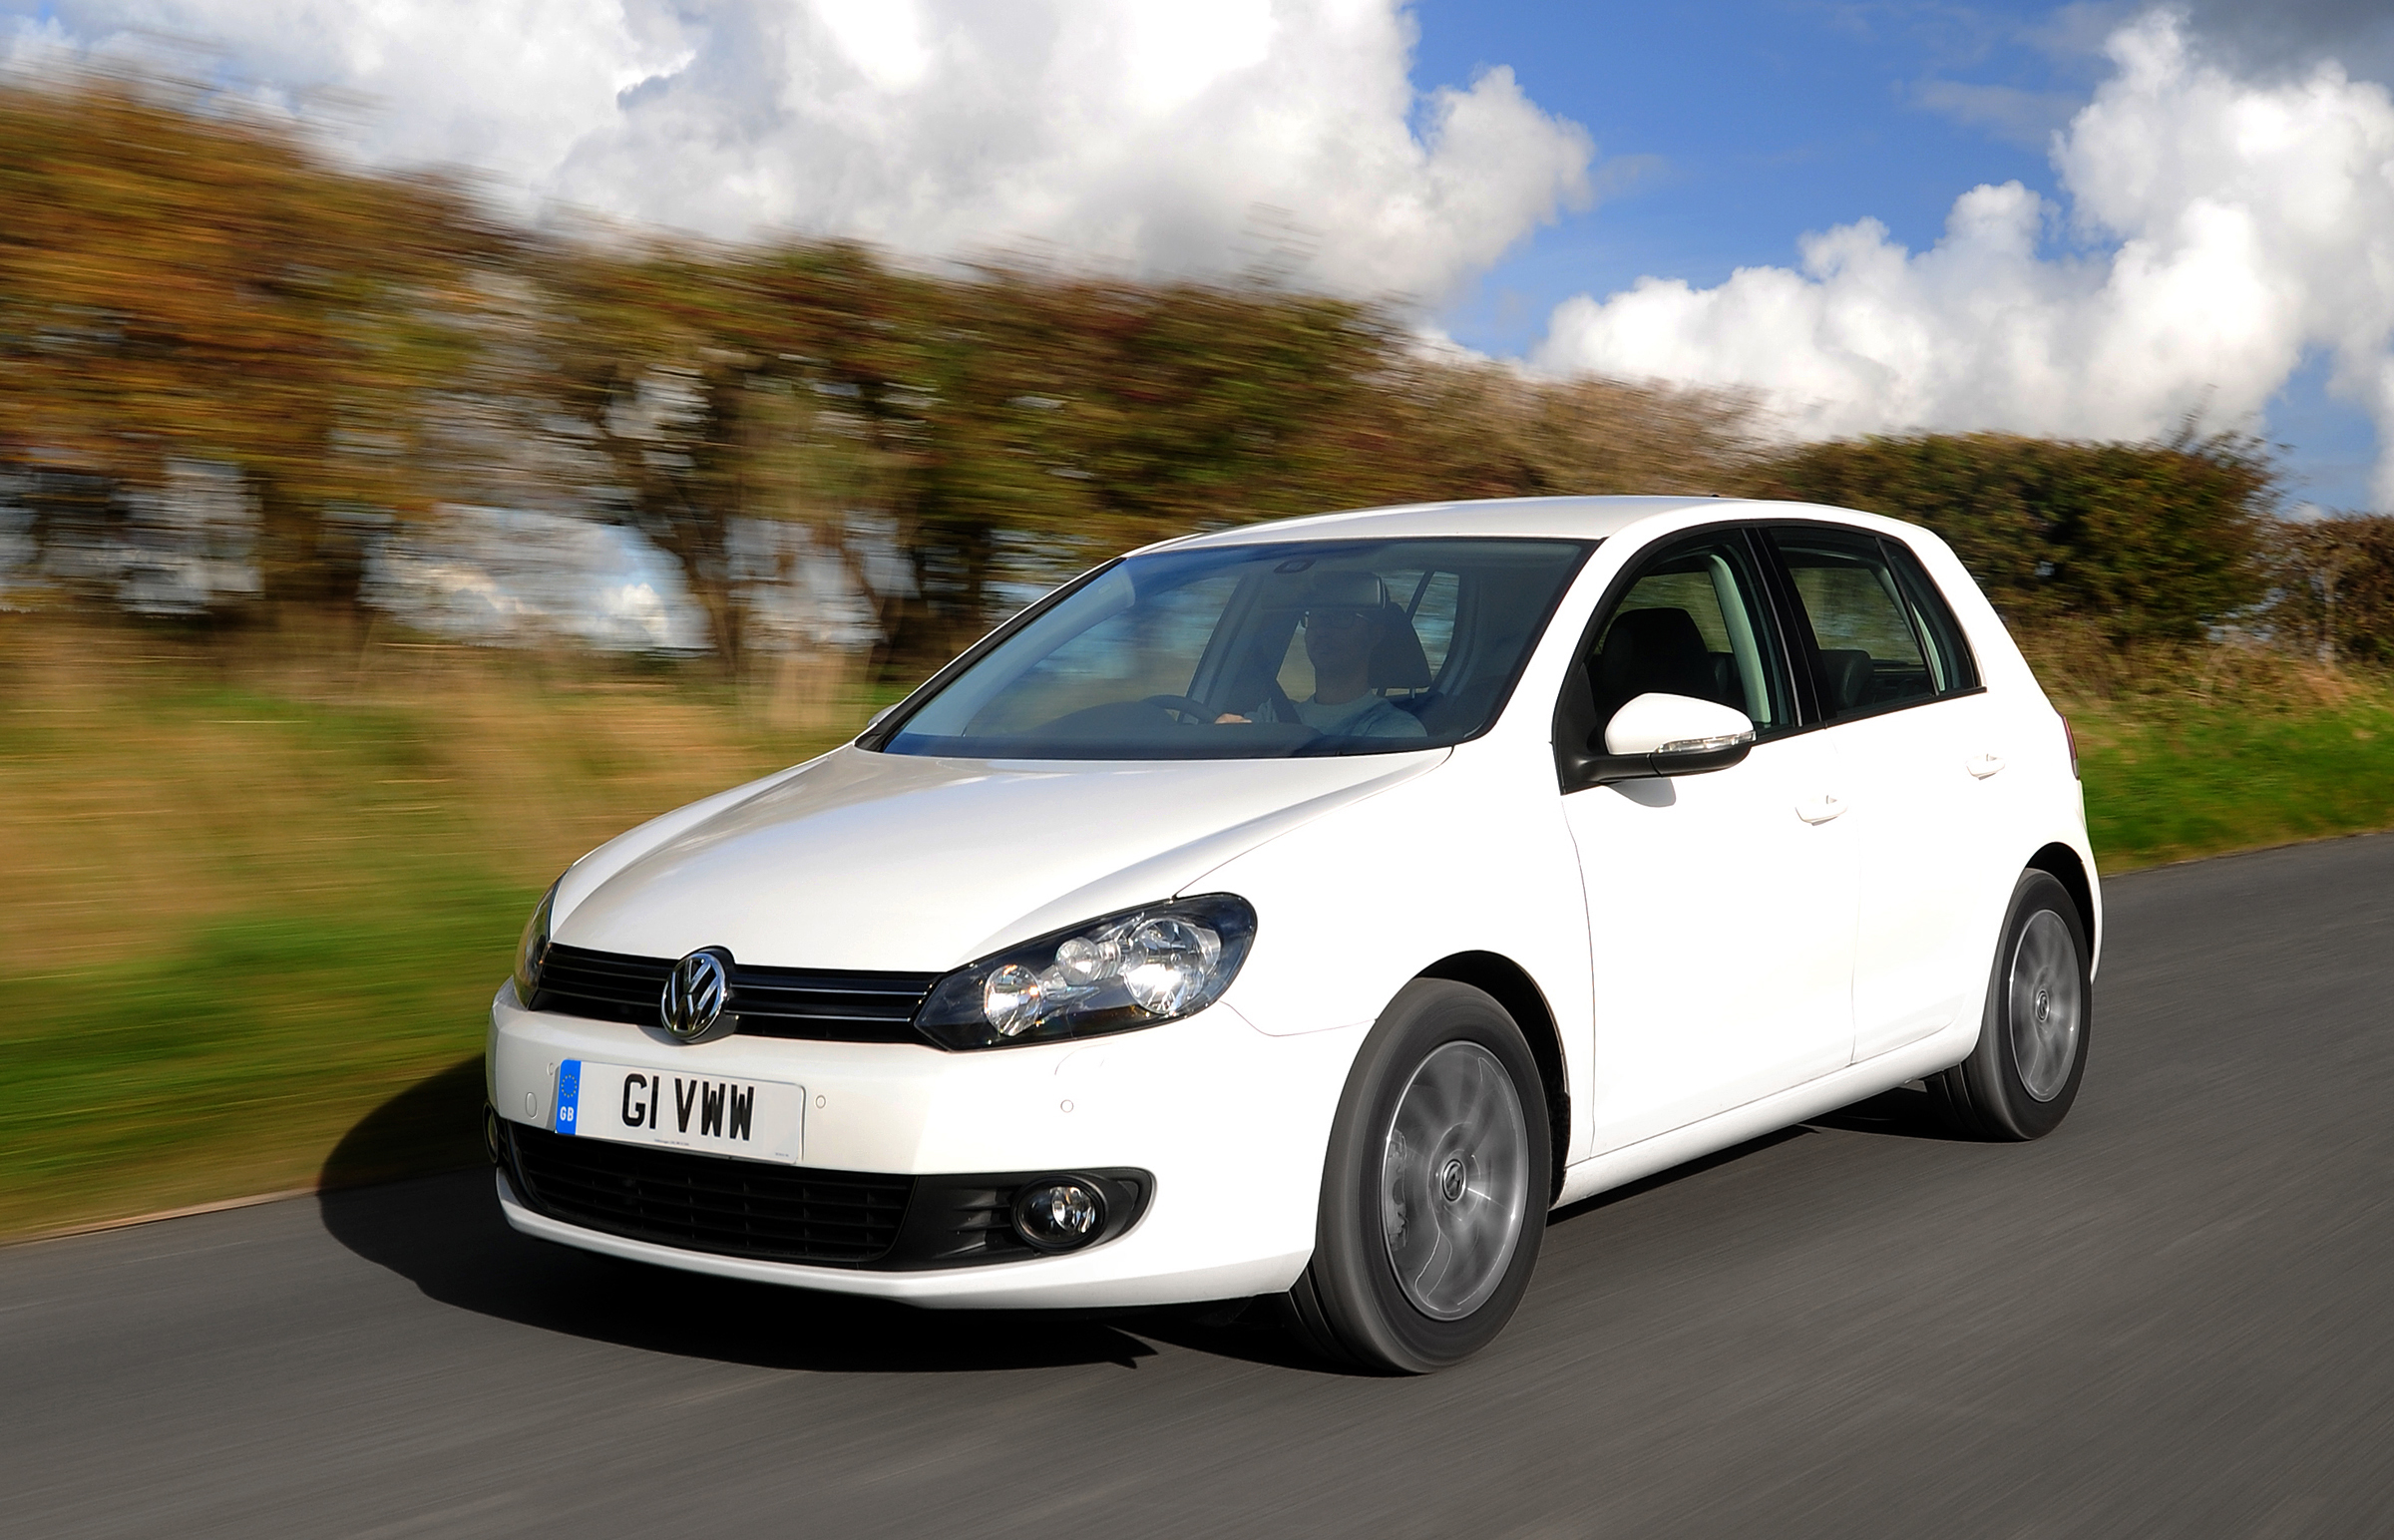 Volkswagen Golf VI Match is added to the model lineup